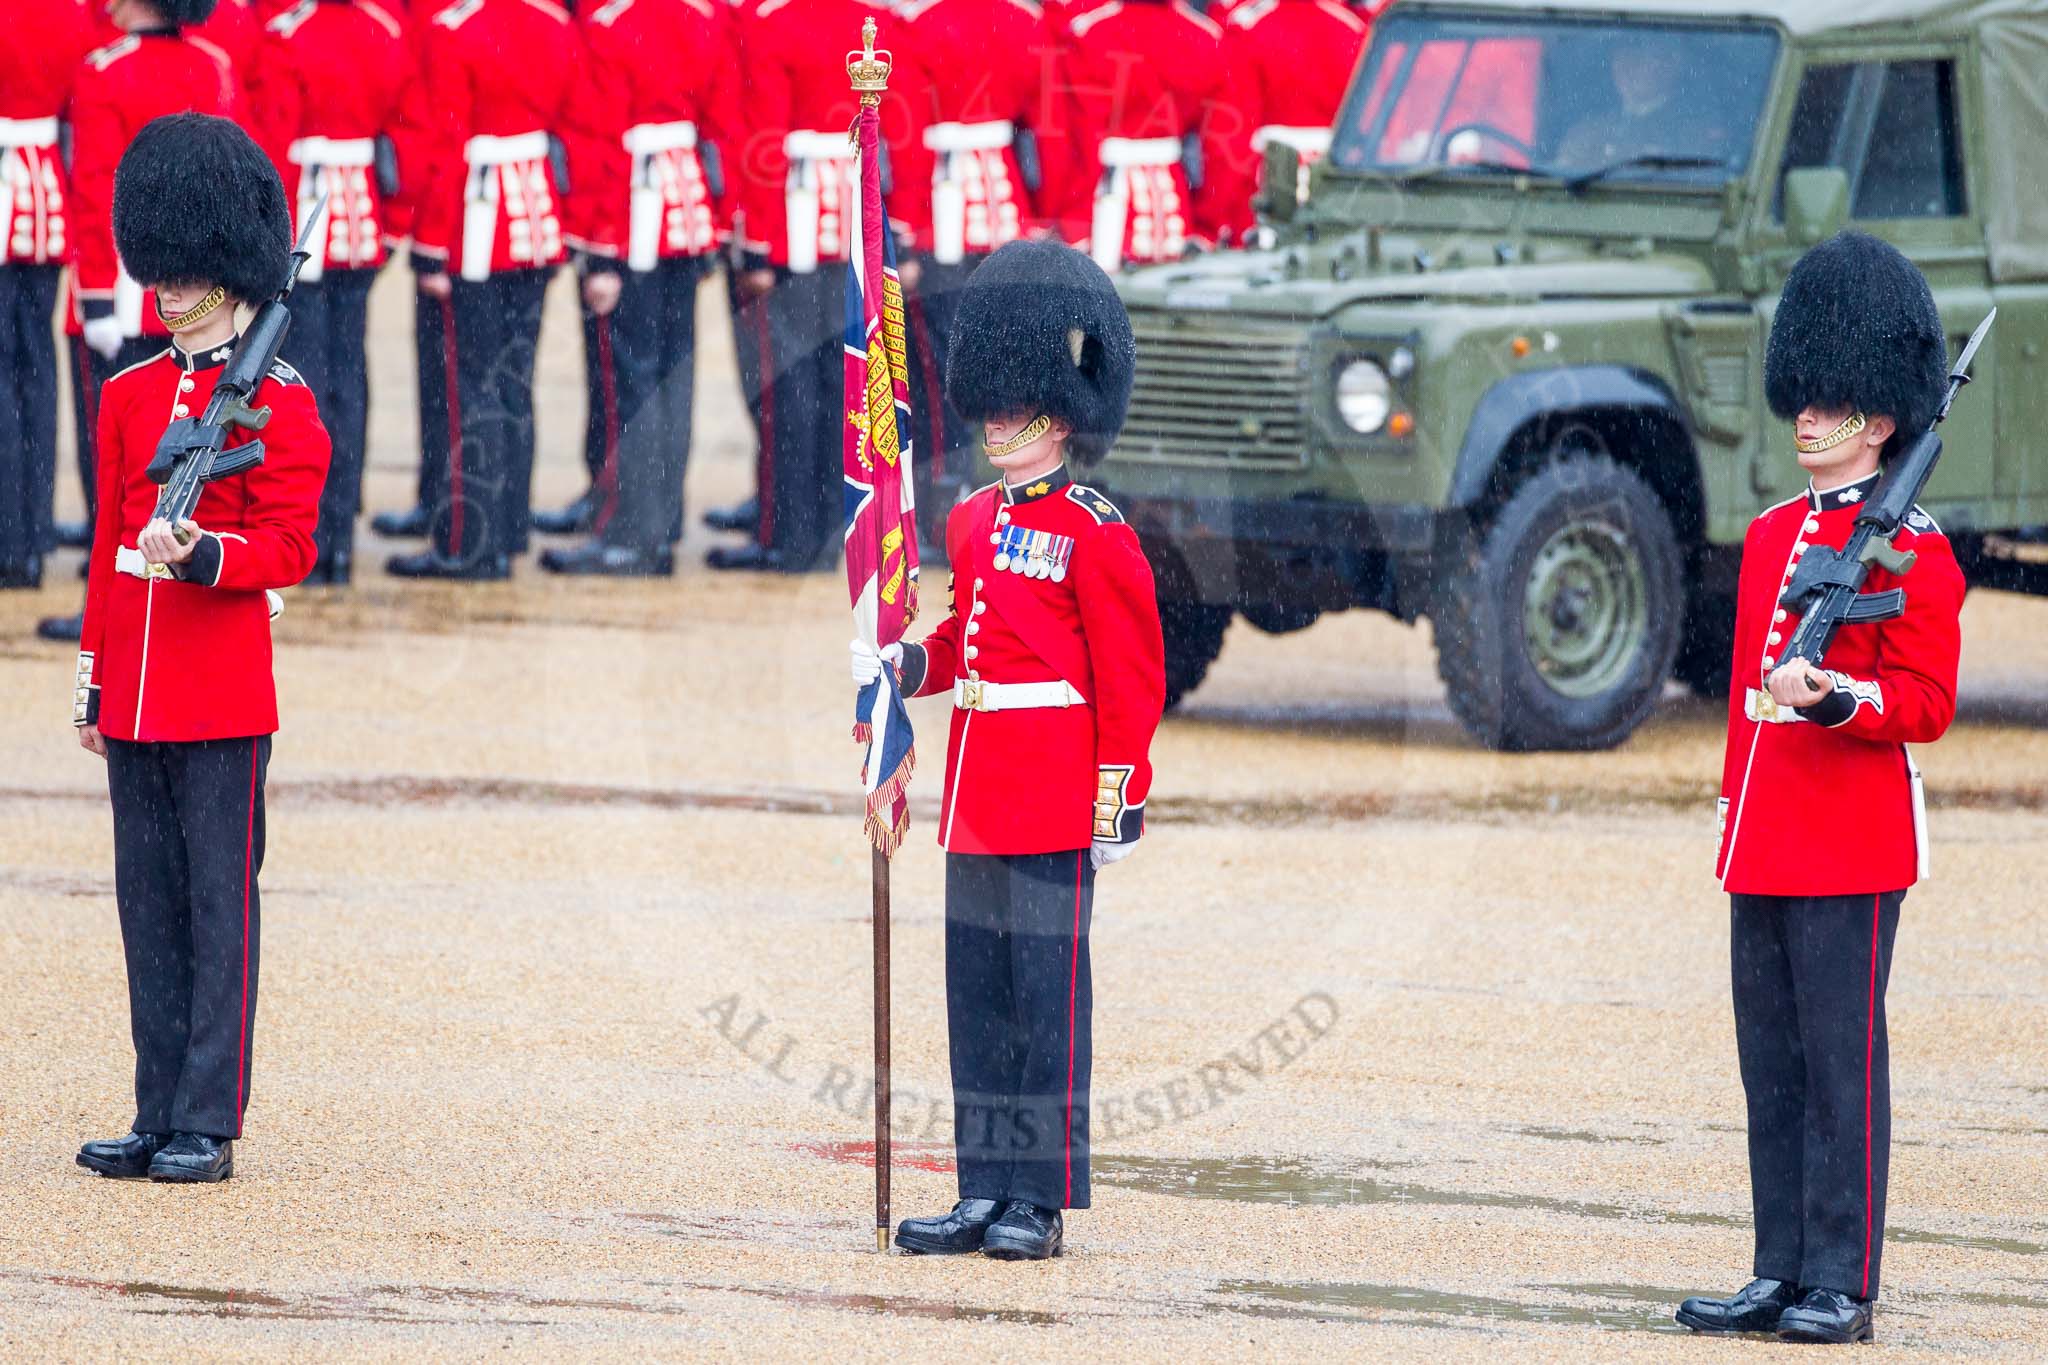 The Colonel's Review 2014.
Horse Guards Parade, Westminster,
London,

United Kingdom,
on 07 June 2014 at 10:29, image #135